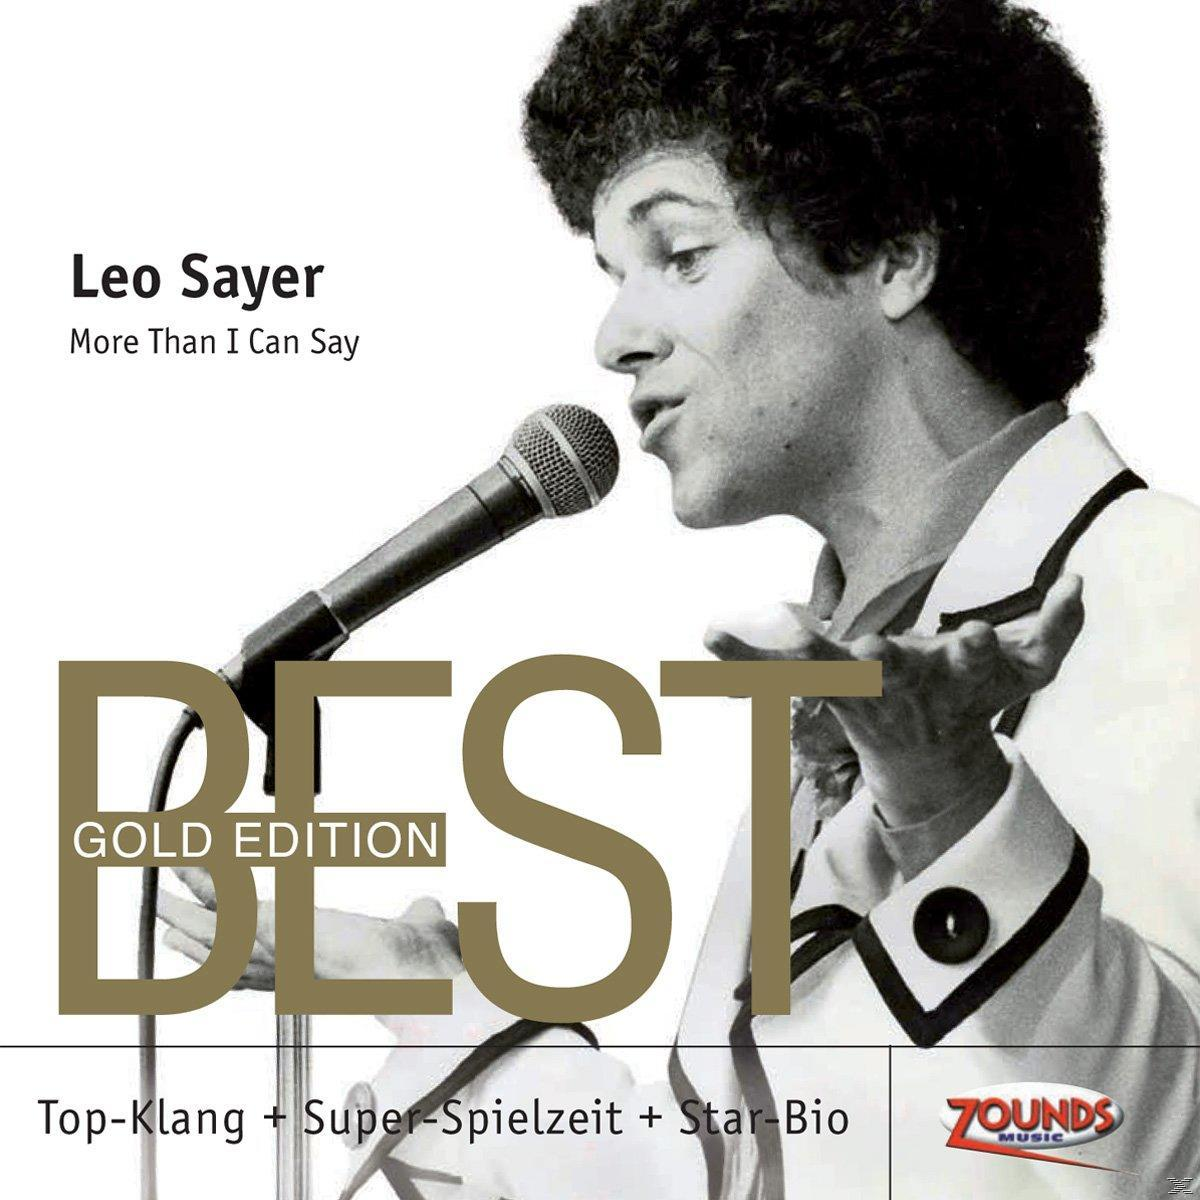 Say Sayer Can Than (CD) I (Gold Leo More Edition) - -